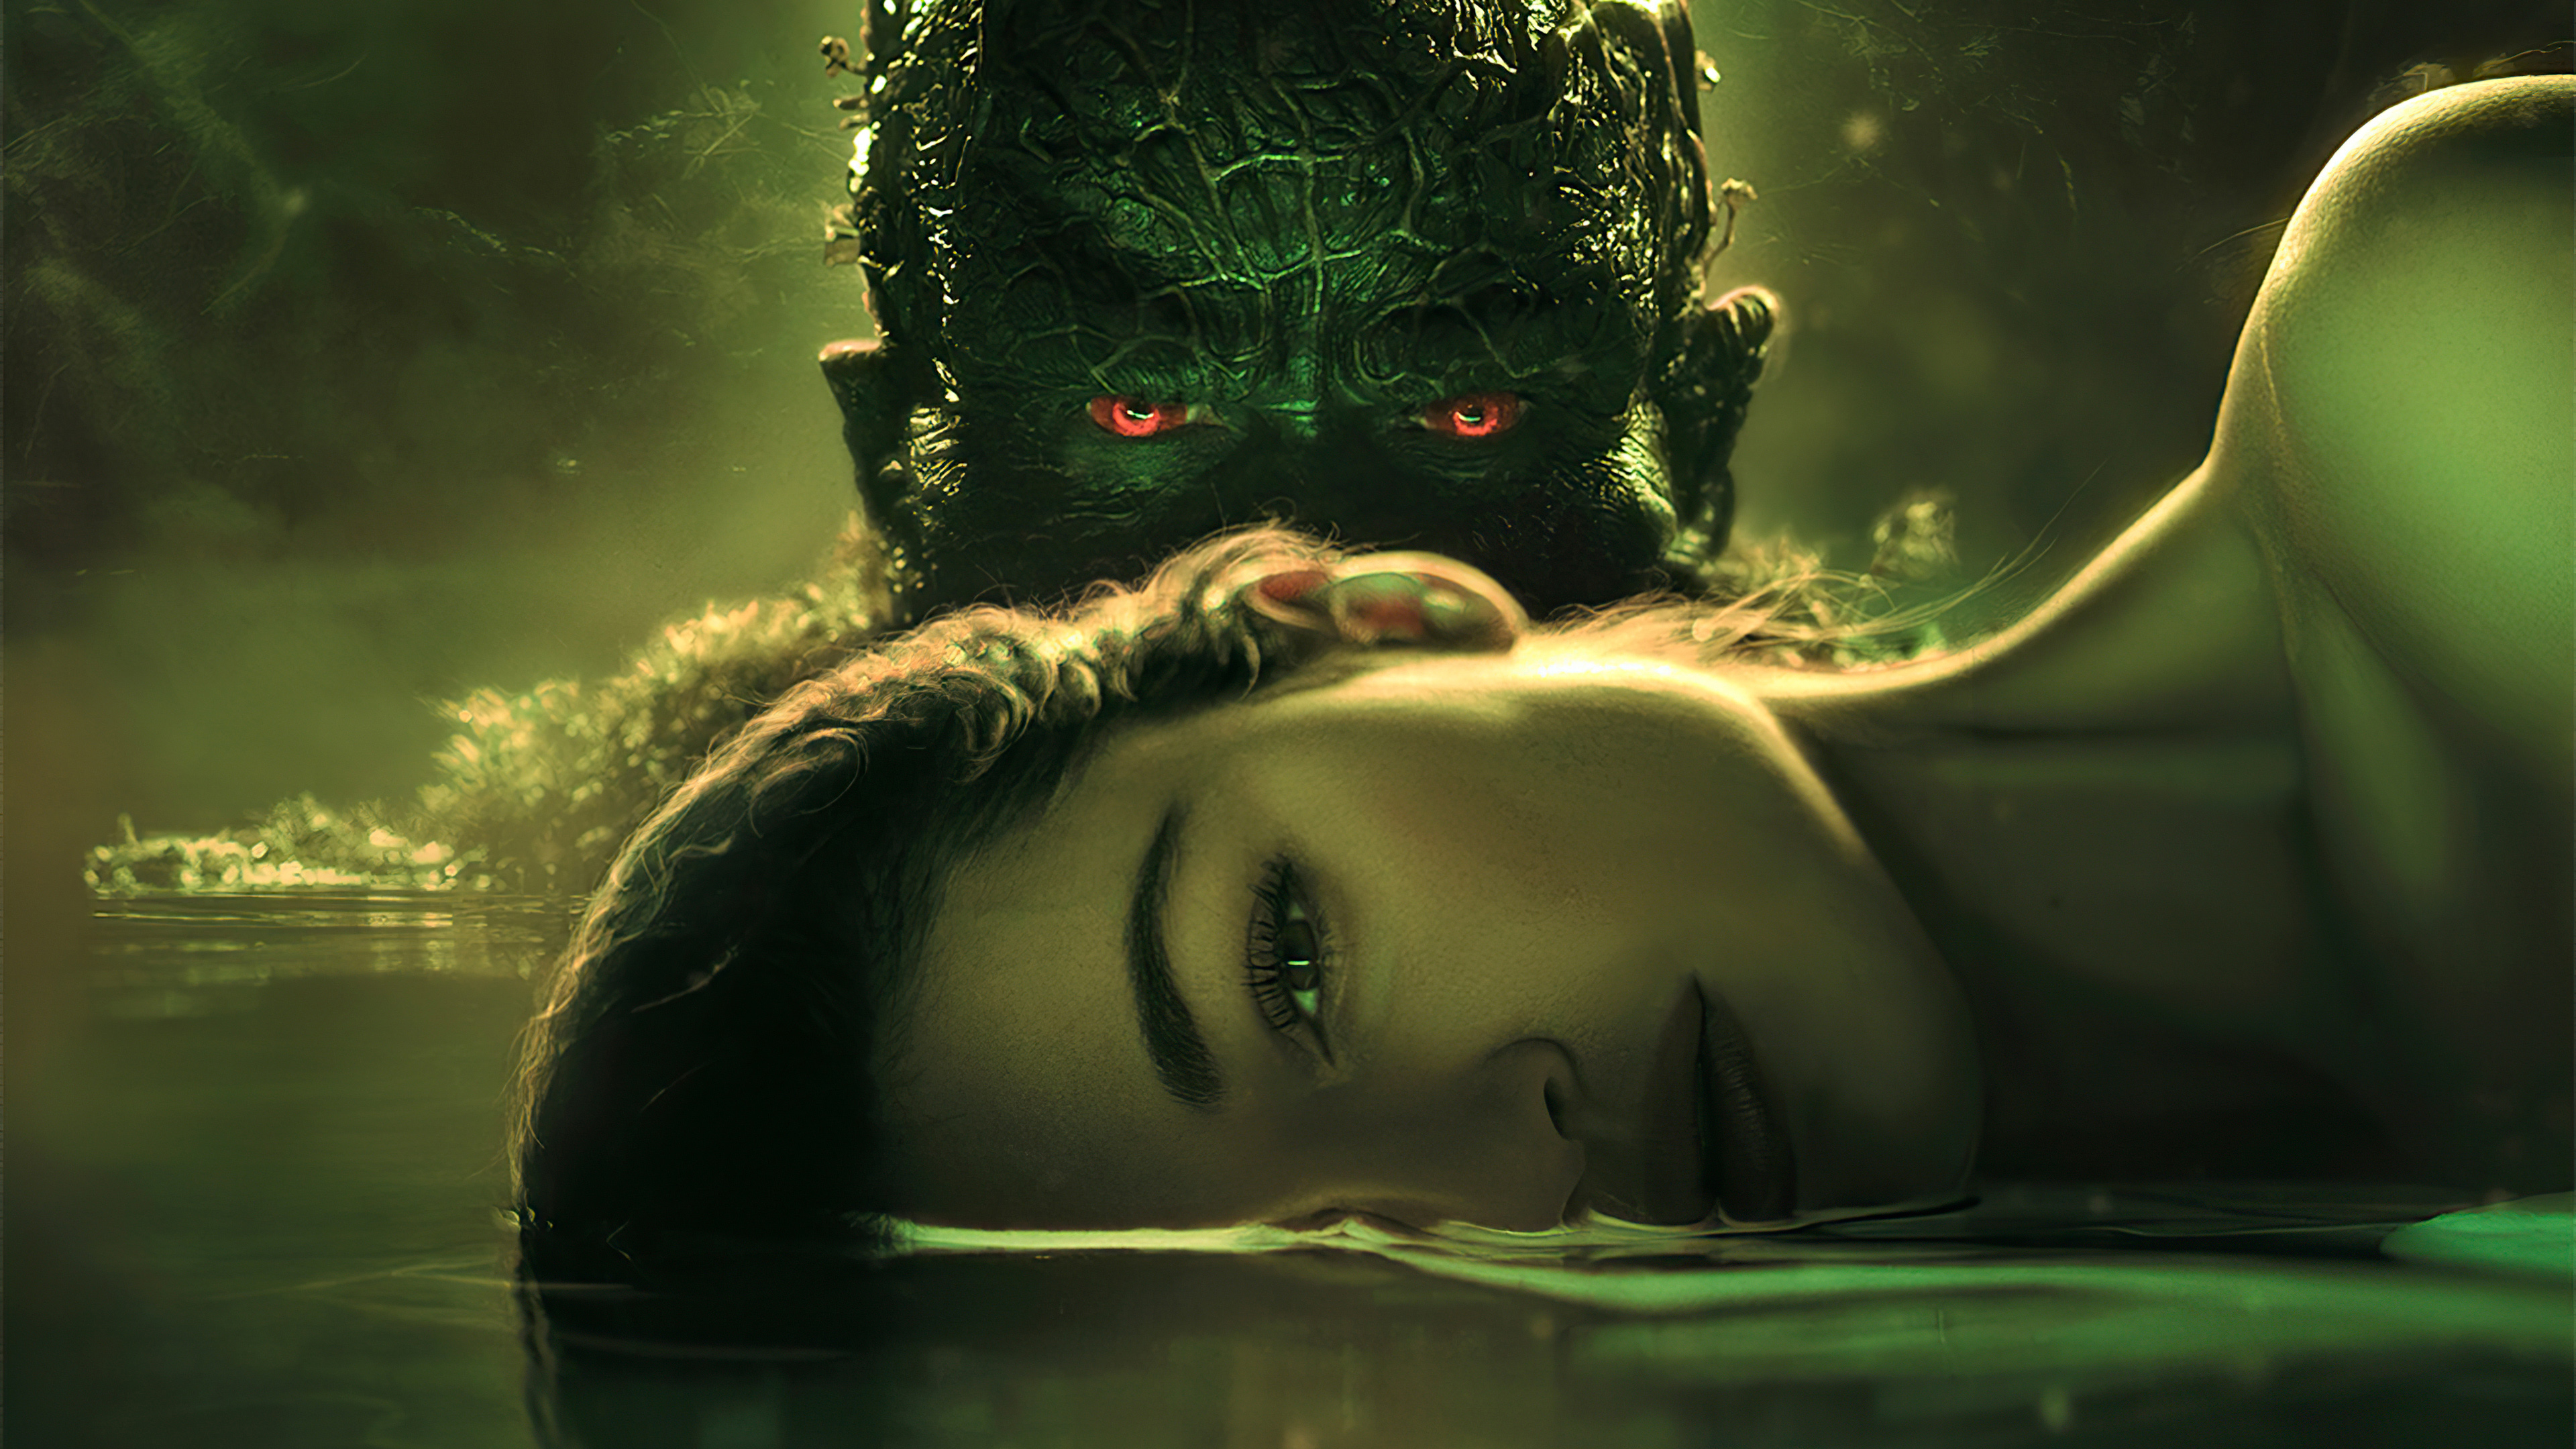 Swamp Thing CW Arrival With Horrific Poster 4K